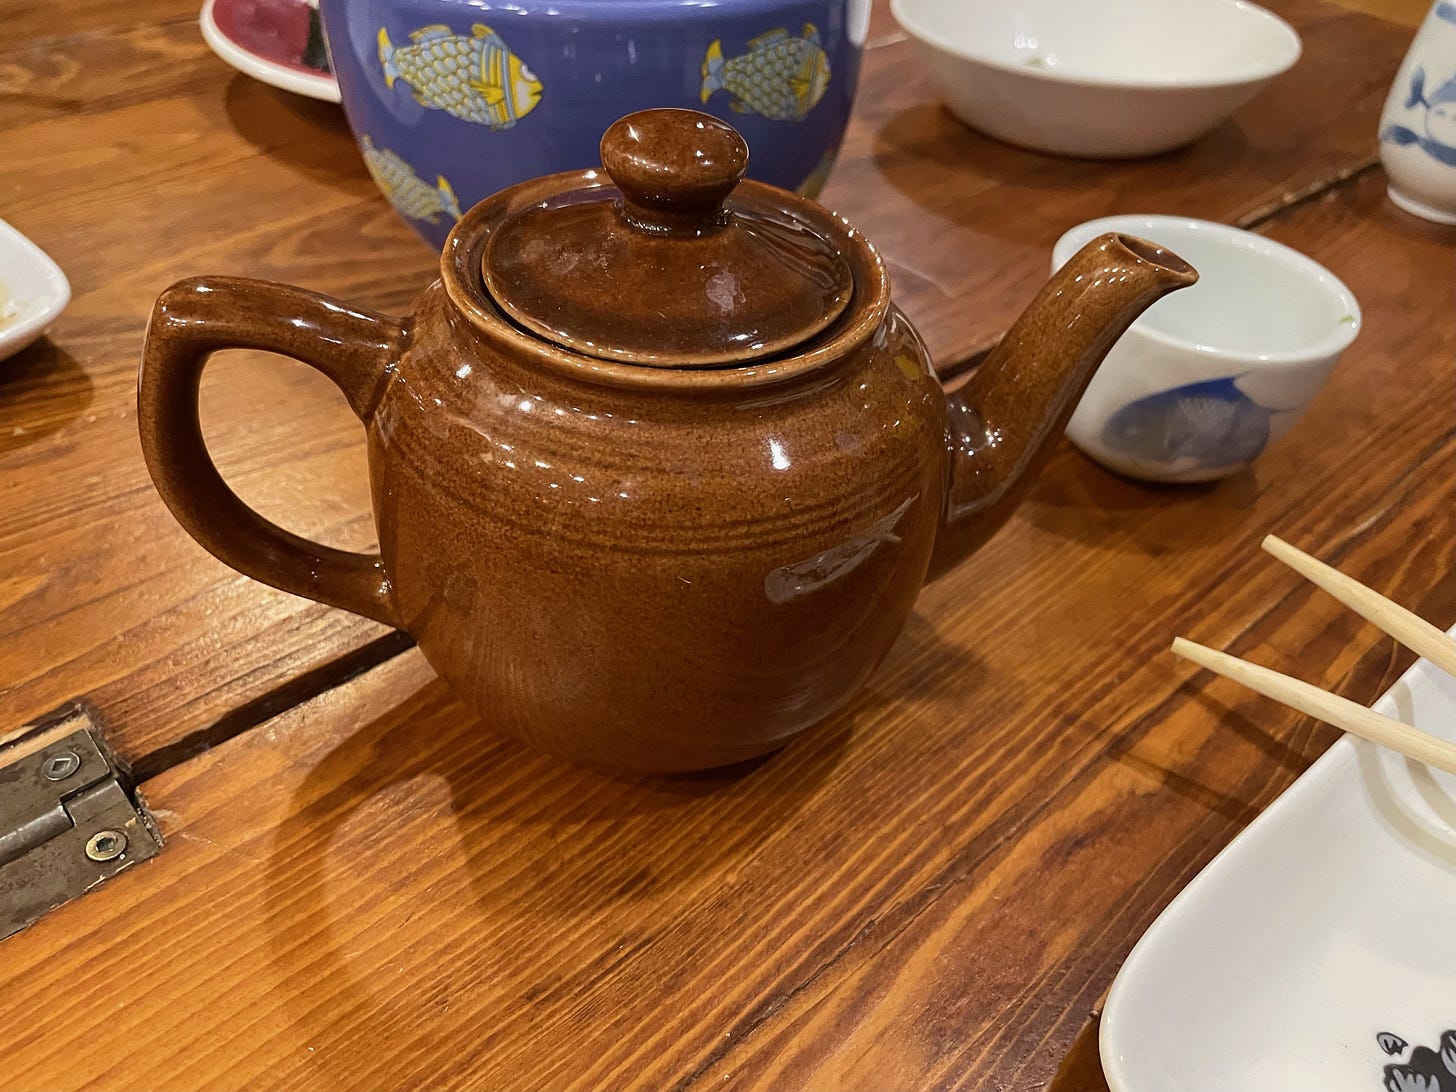 That teapot is on my dining room table right now, after all these years!